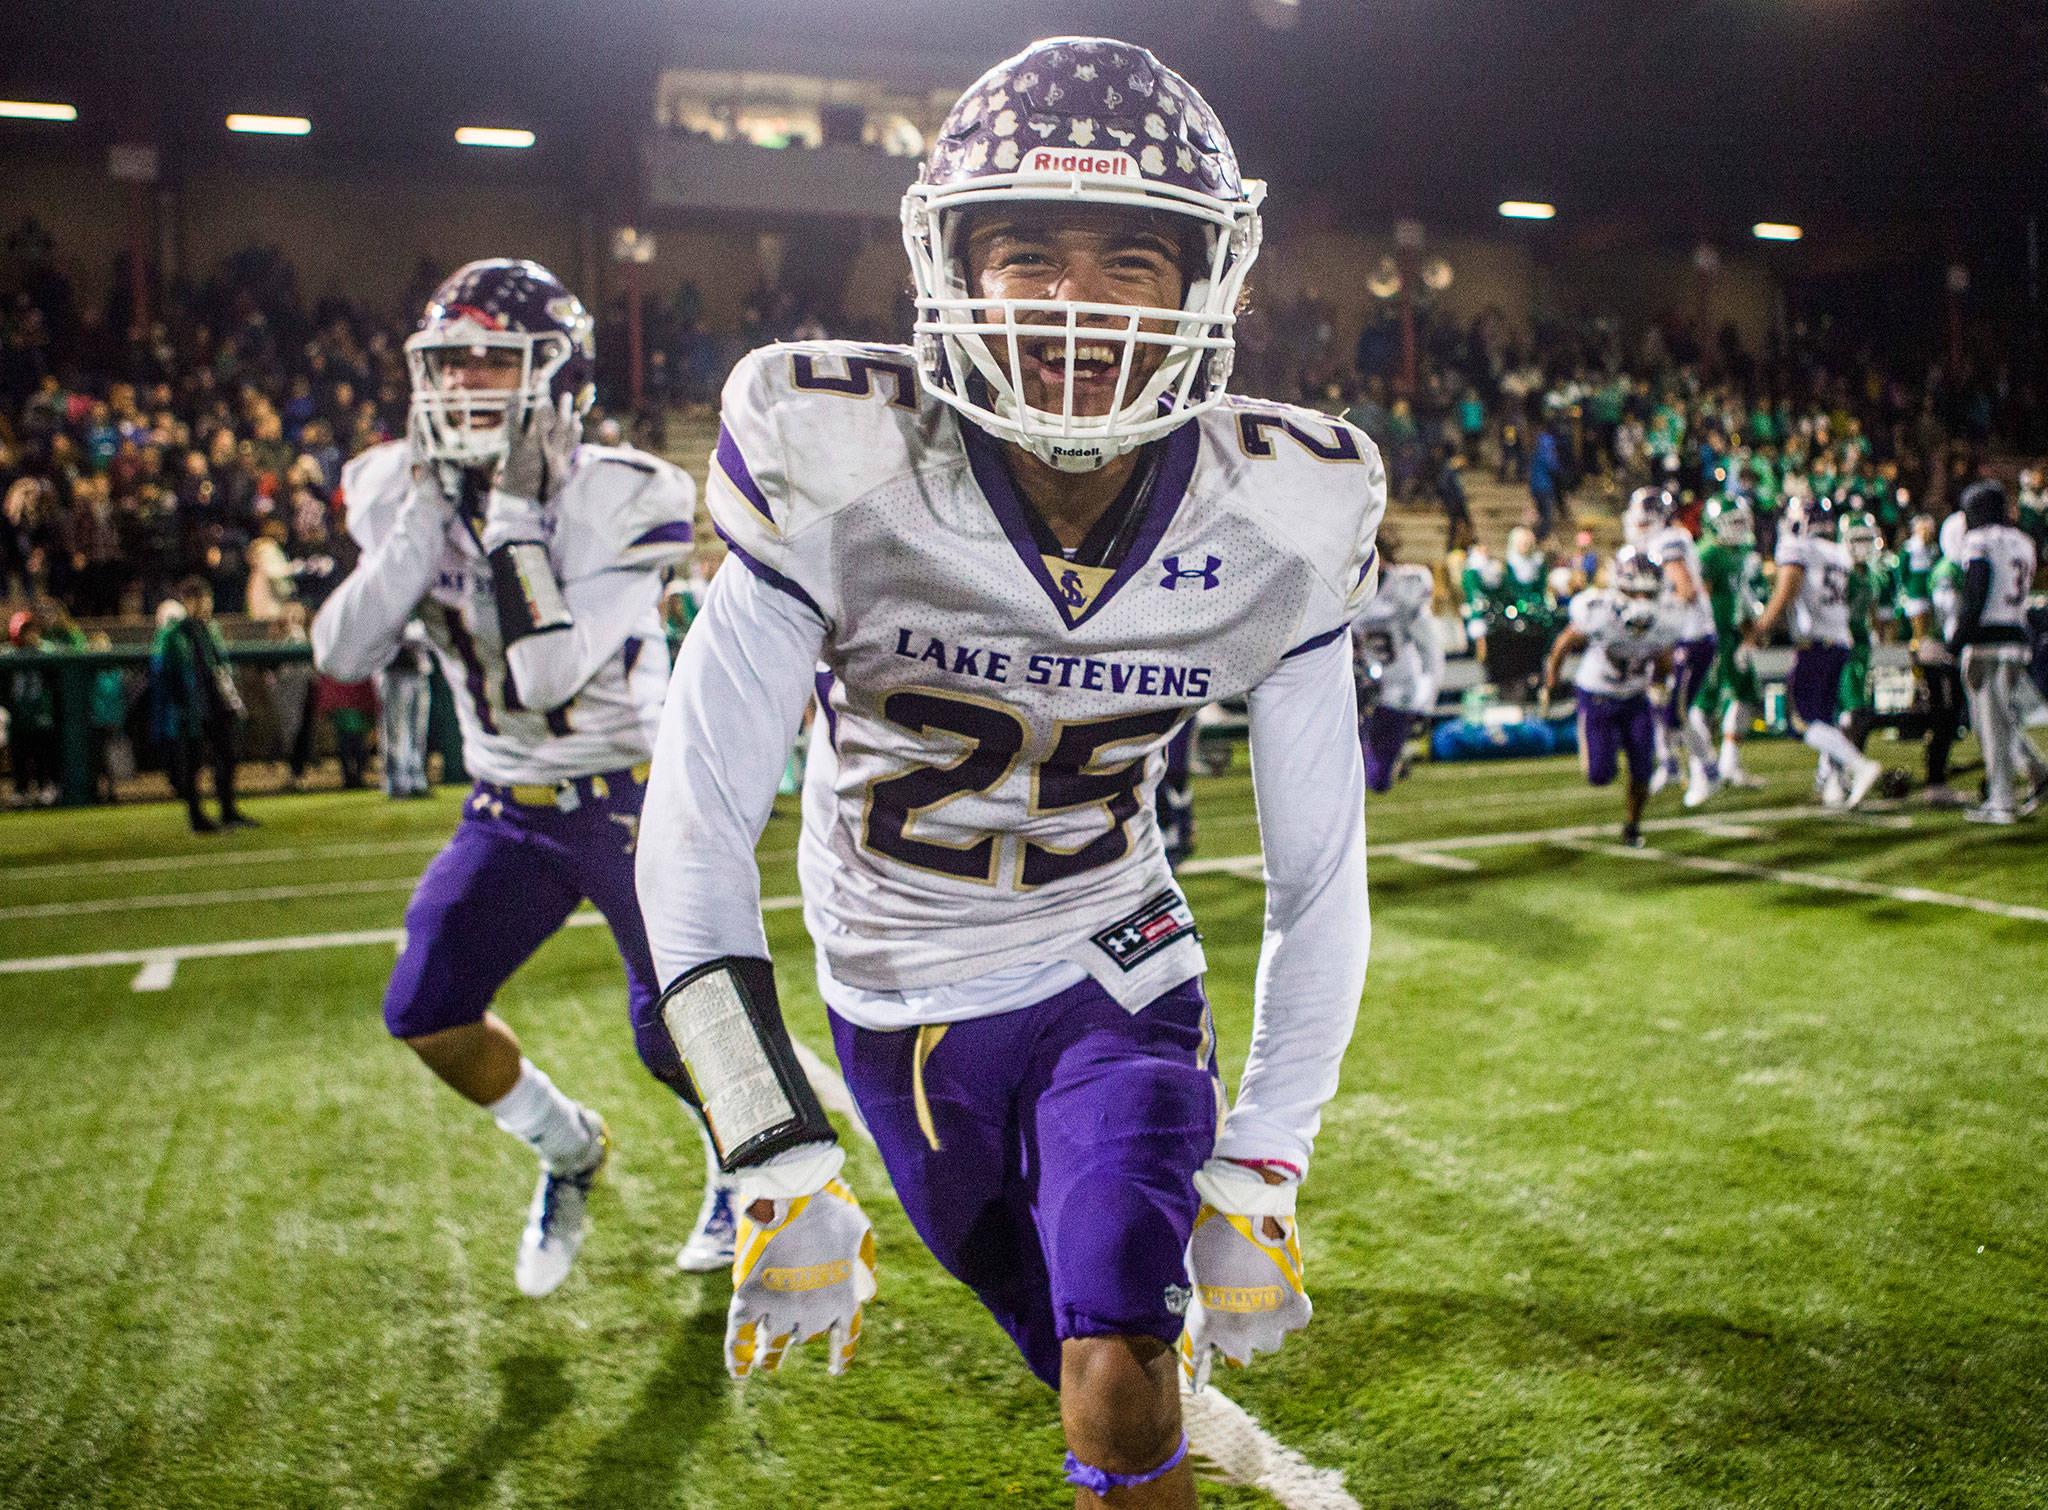 Lake Stevens’ Kasen Kinchen smiles after winning a Class 4A state state semifinal game against Woodinville at Pop Keeney Stadium on Saturday, Nov. 24, 2018, in Bothell. (Olivia Vanni / The Herald)